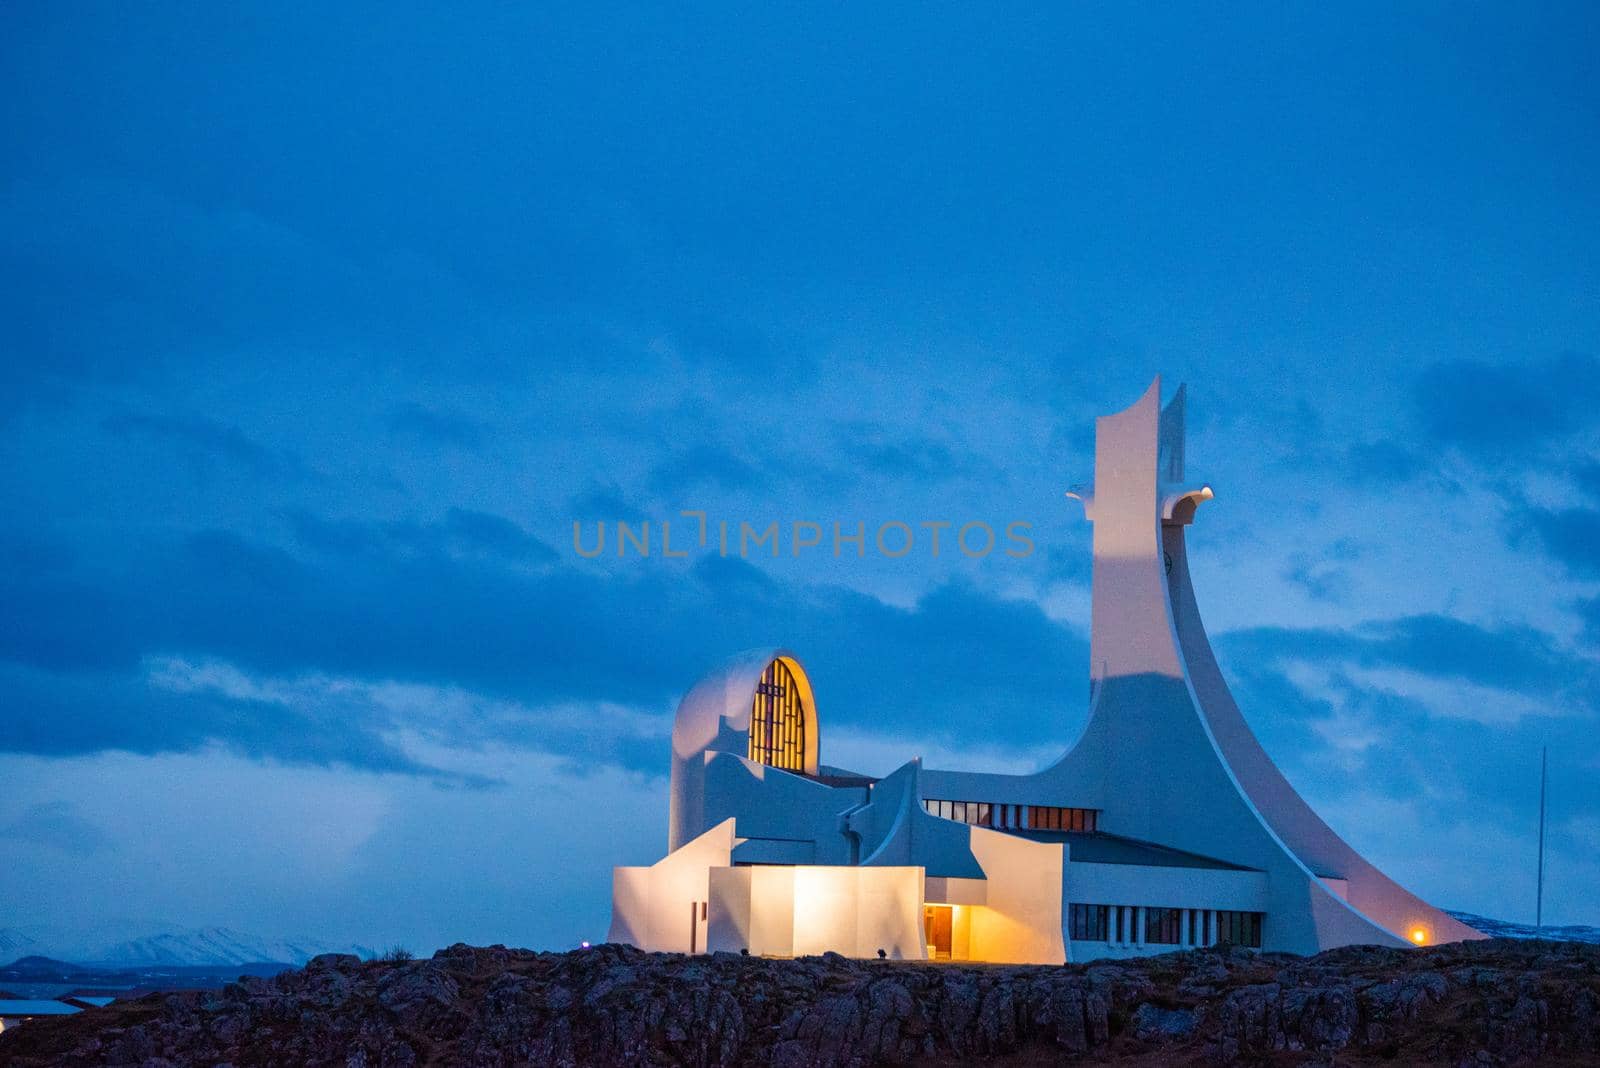 Uniquely shaped geometric church building with yellow glowing interior lights and a pretty blue sky backdrop